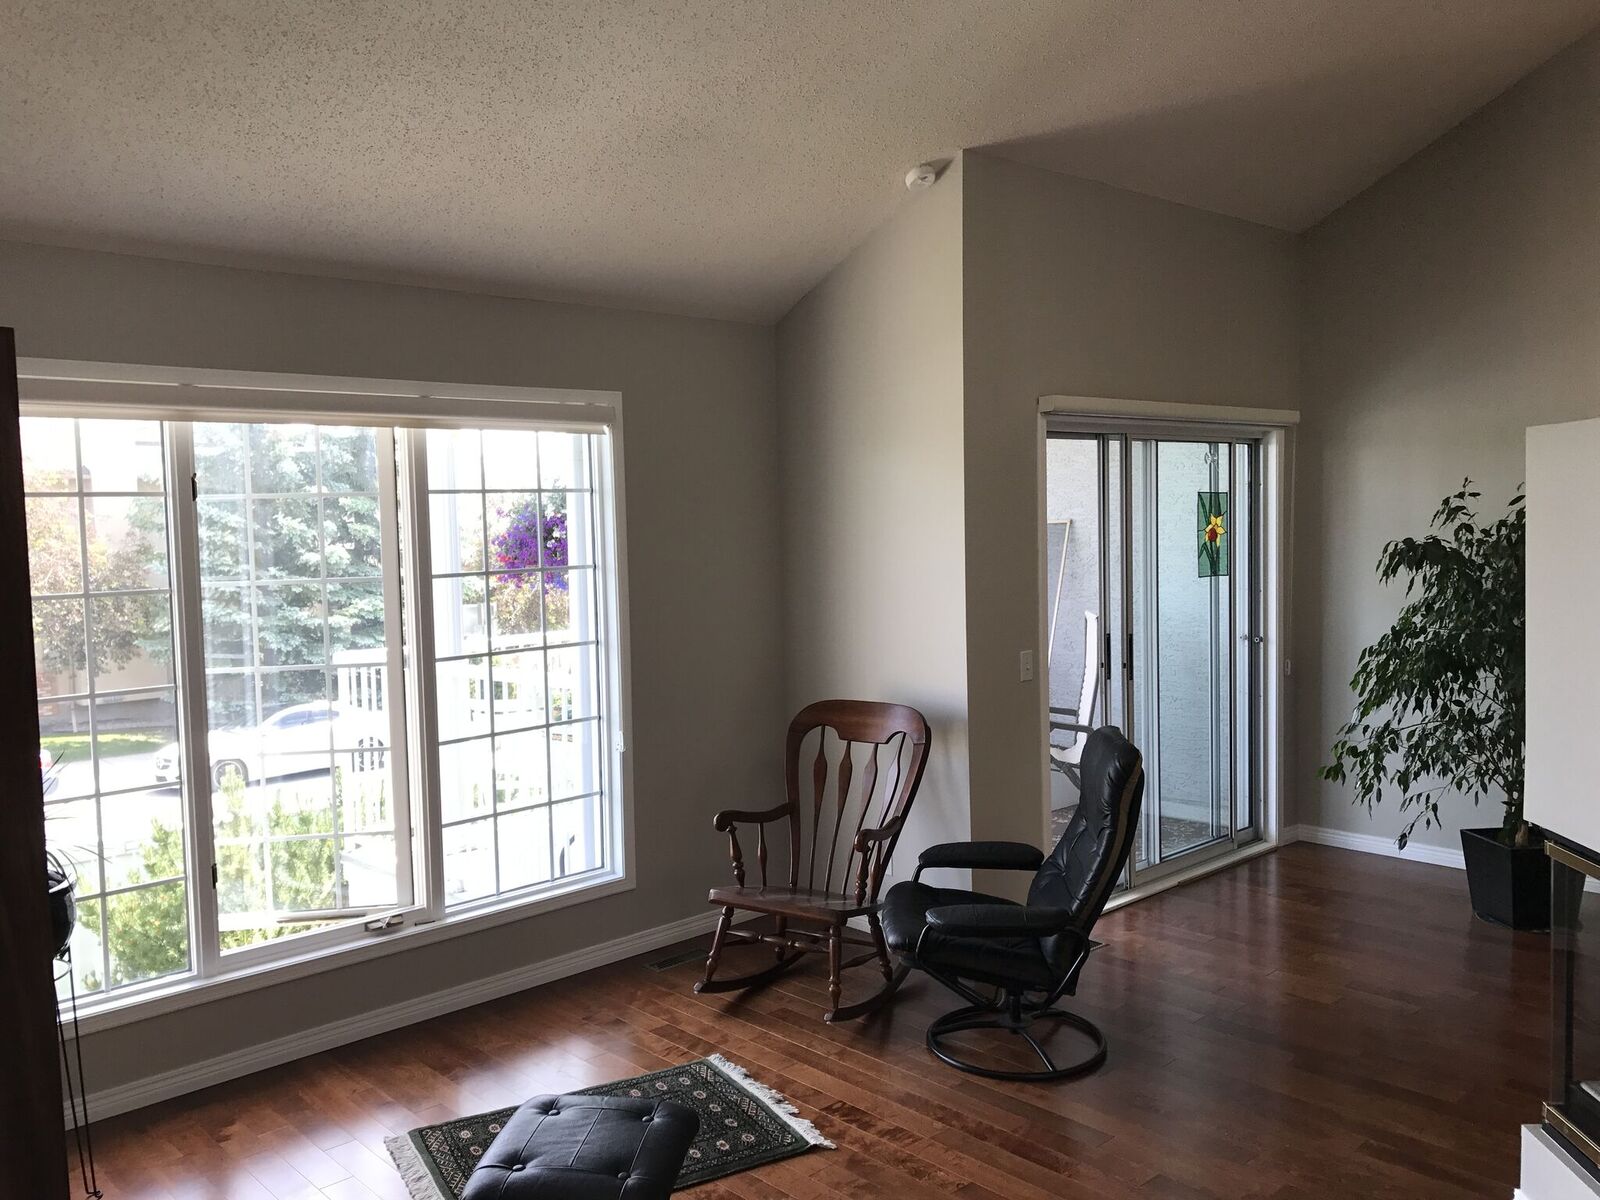 South Calgary Painters Best Professional Interior